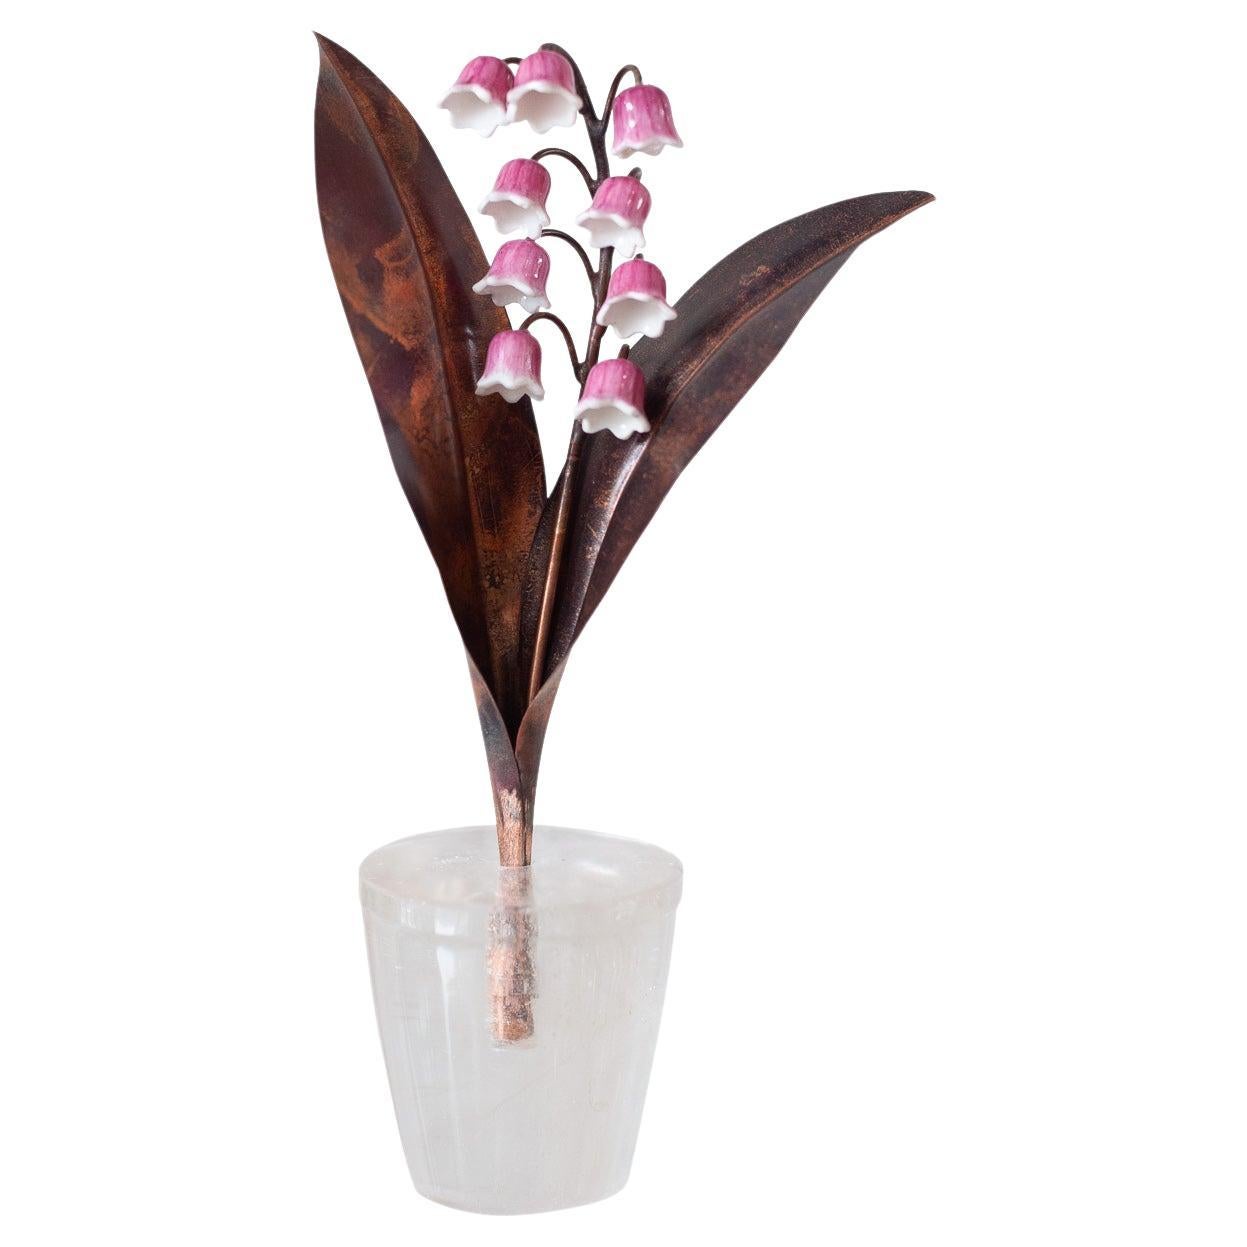 Samuel Mazy x Maison Nurita Pink Glazed Porcelain Lily of the Valley Sculpture For Sale